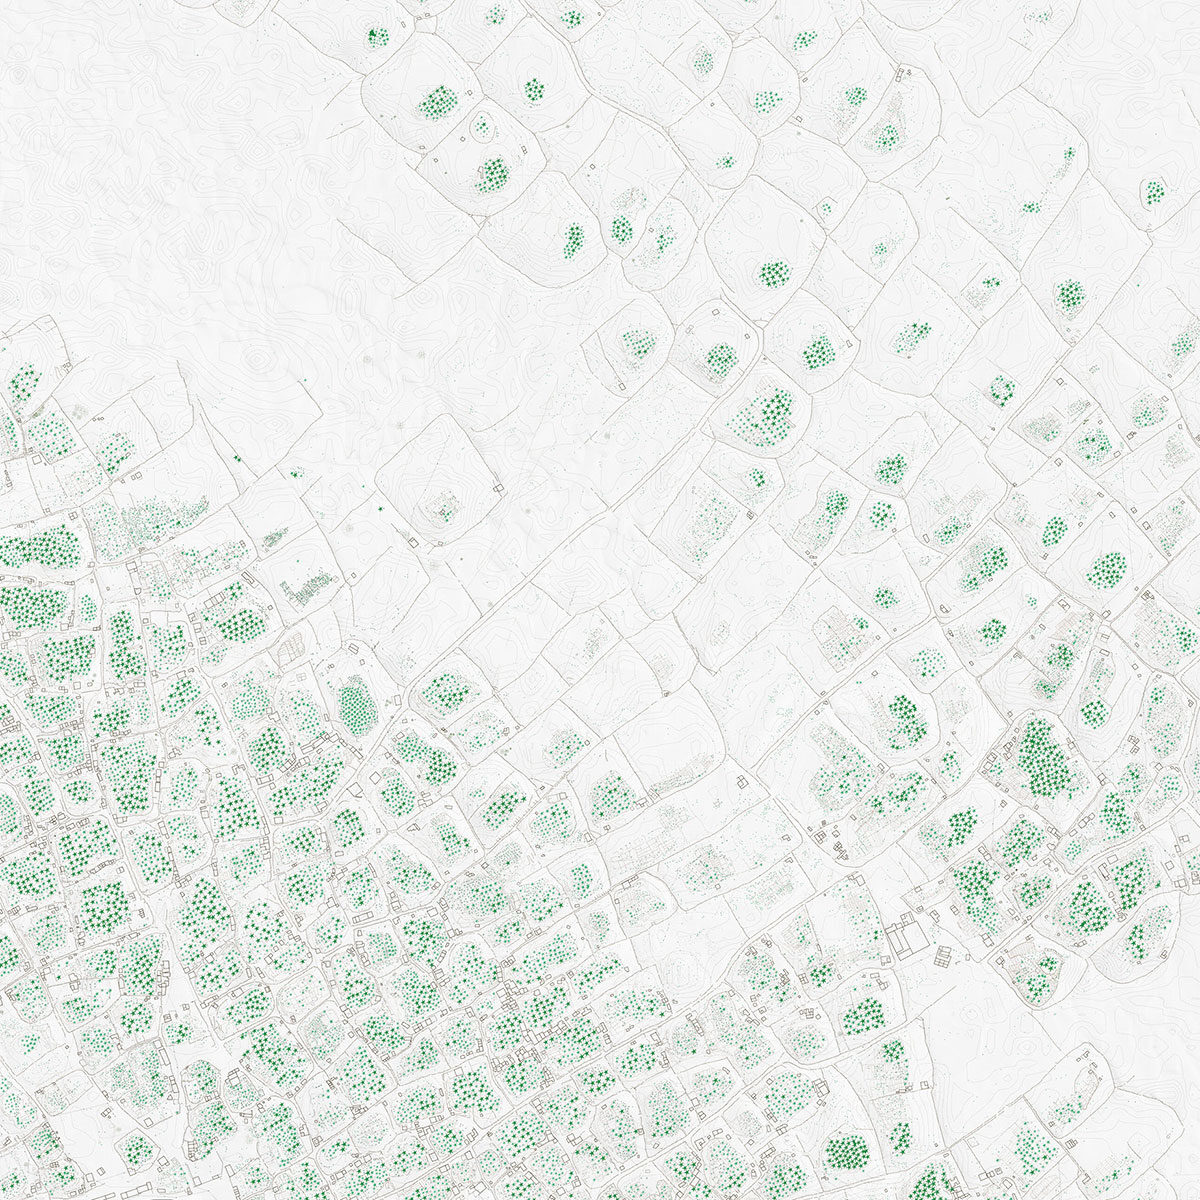 Topographical map of a landscape with areas of greenery and building developments.